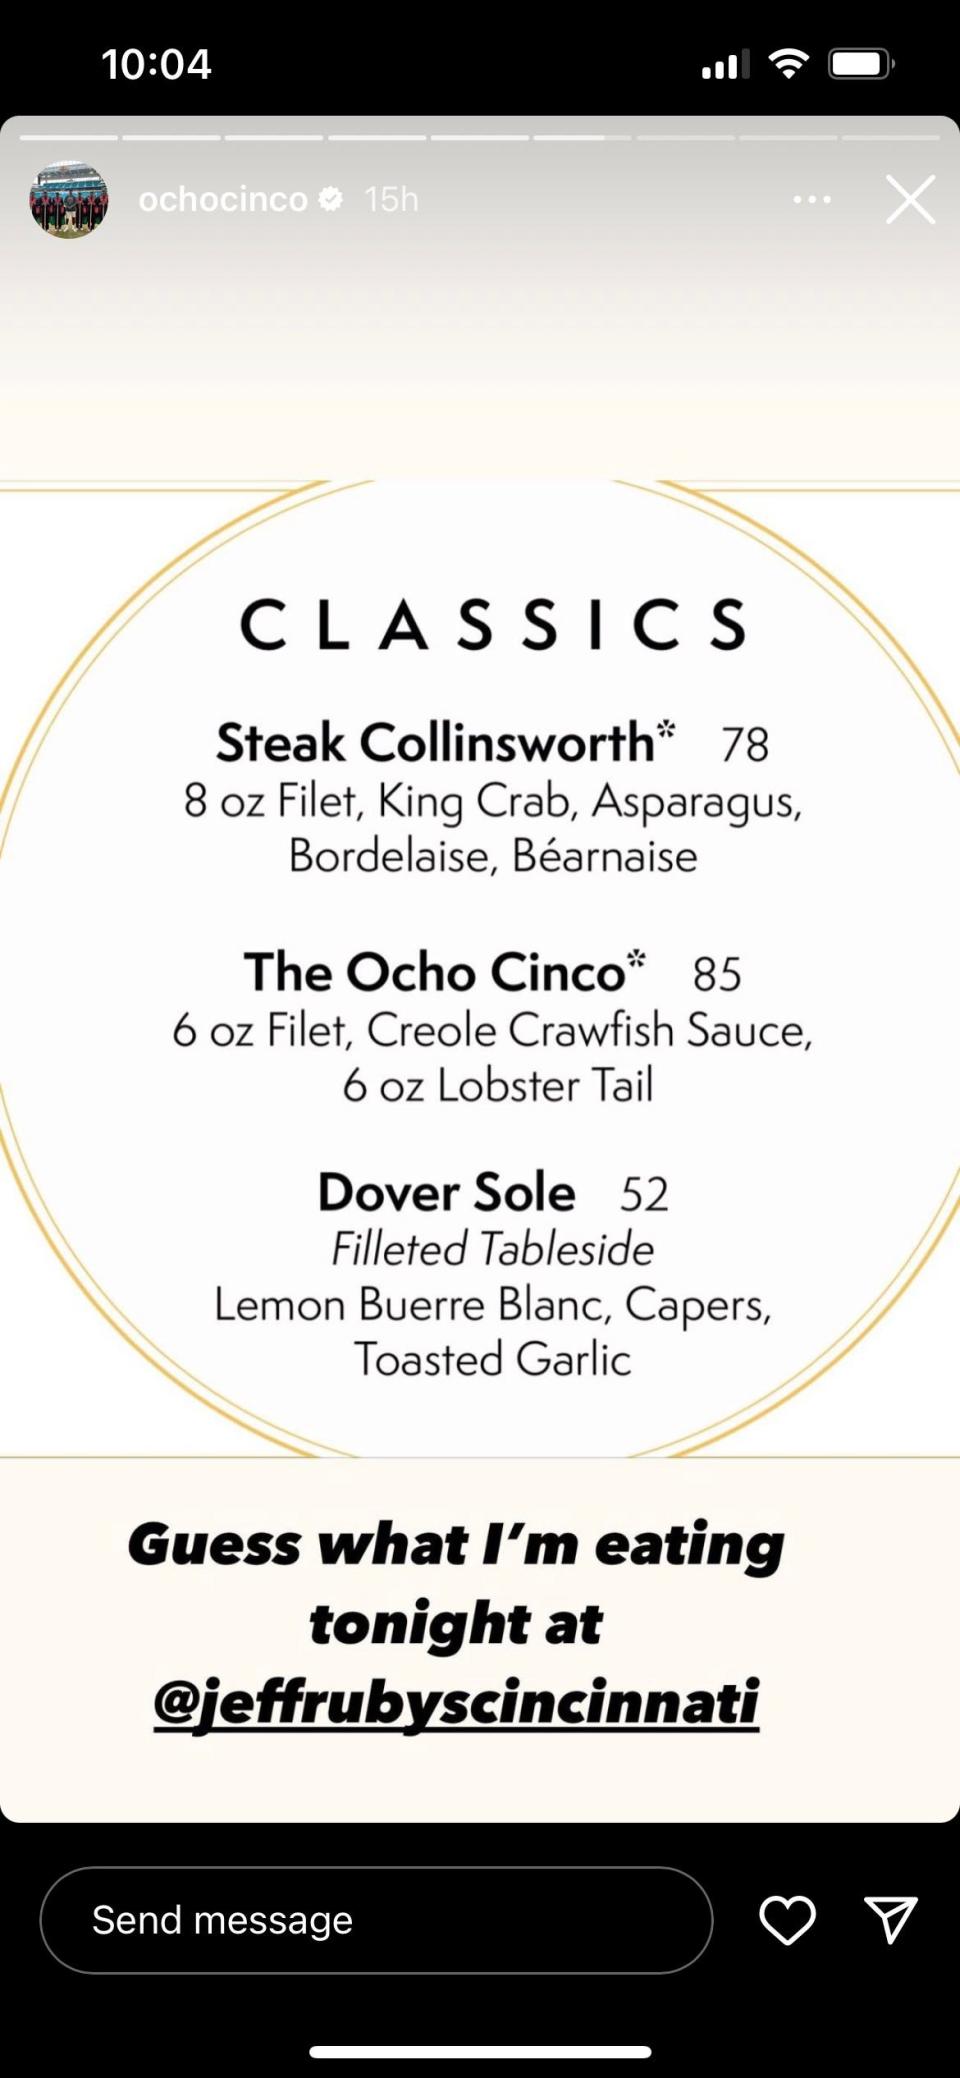 Johnson shared a photo of the menu at Jeff Ruby's, which includes "The Ocho Cinco," on his Instagram Story.